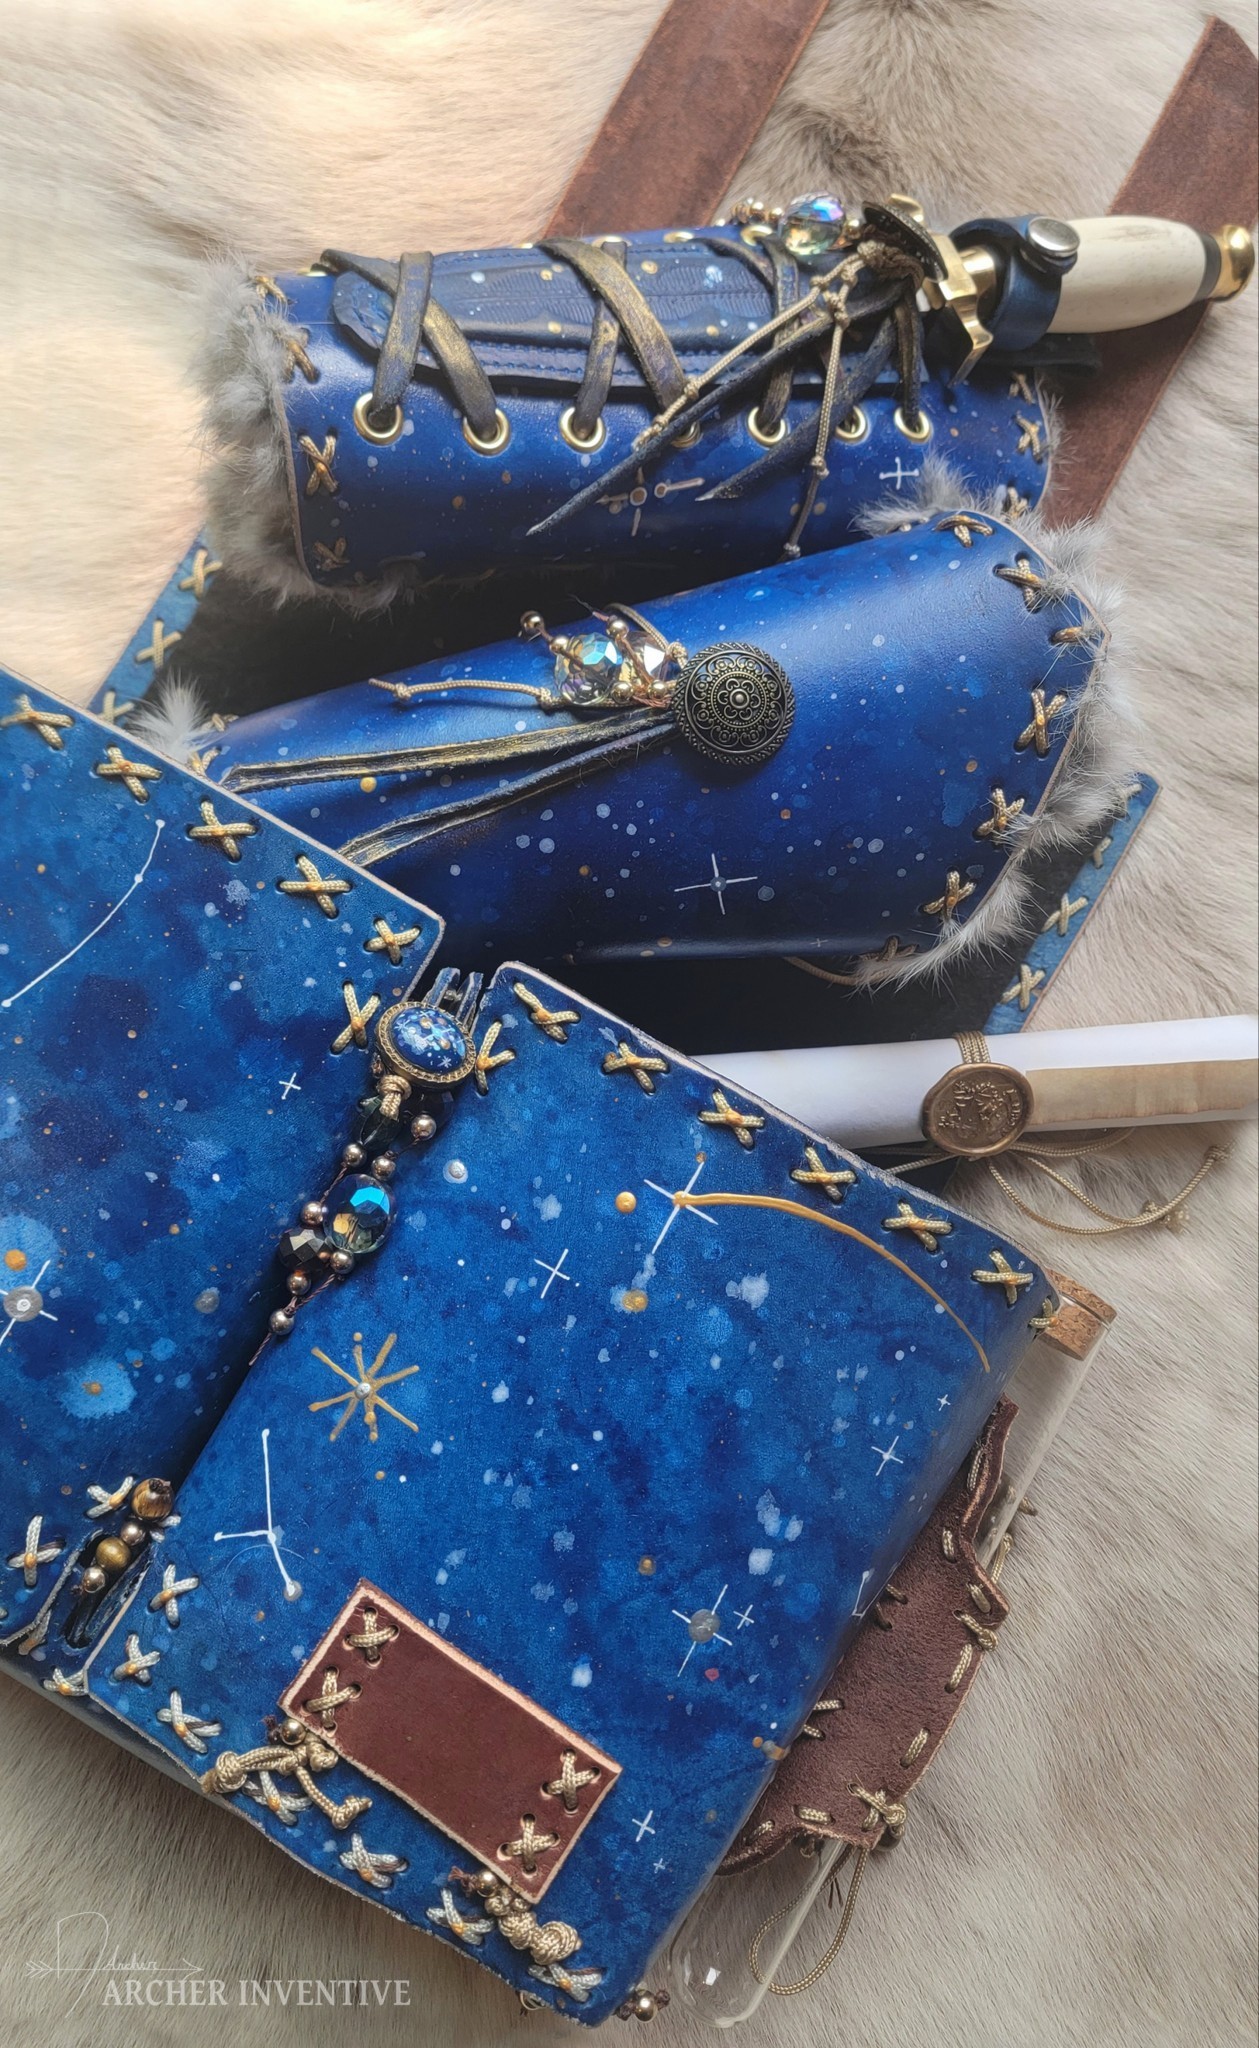 Image is of a navy blue leather bag adorned with gold-painted constellations and gold string
                      in x-patterns sewn into the leather. A glass bottle is tied to the right side. Coming out of the bag is a pair of fur-lined wrist braces once of which sheathes a dagger with a white handle.